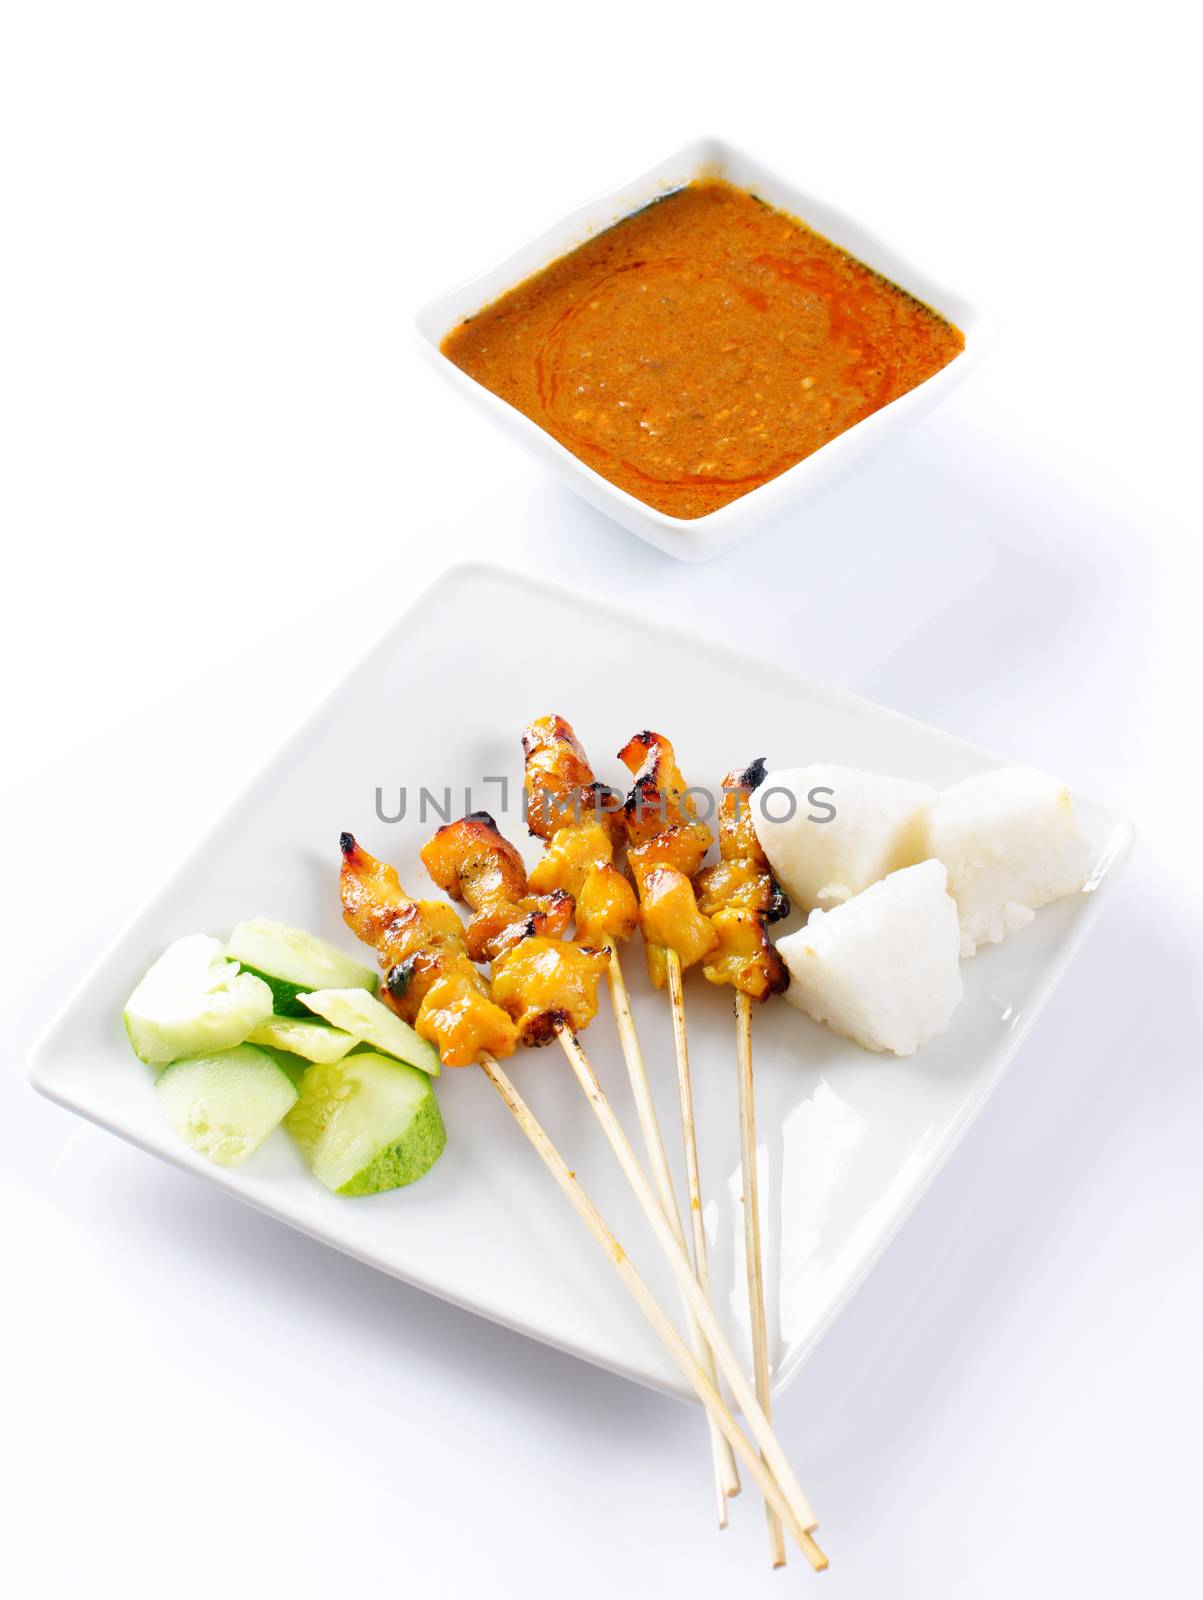 Chicken satay or sate, skewered and grilled meat, served with peanut sauce, cucumber and ketupat. Traditional Malay food. Delicious hot and spicy Malaysian dish, Asian cuisine.